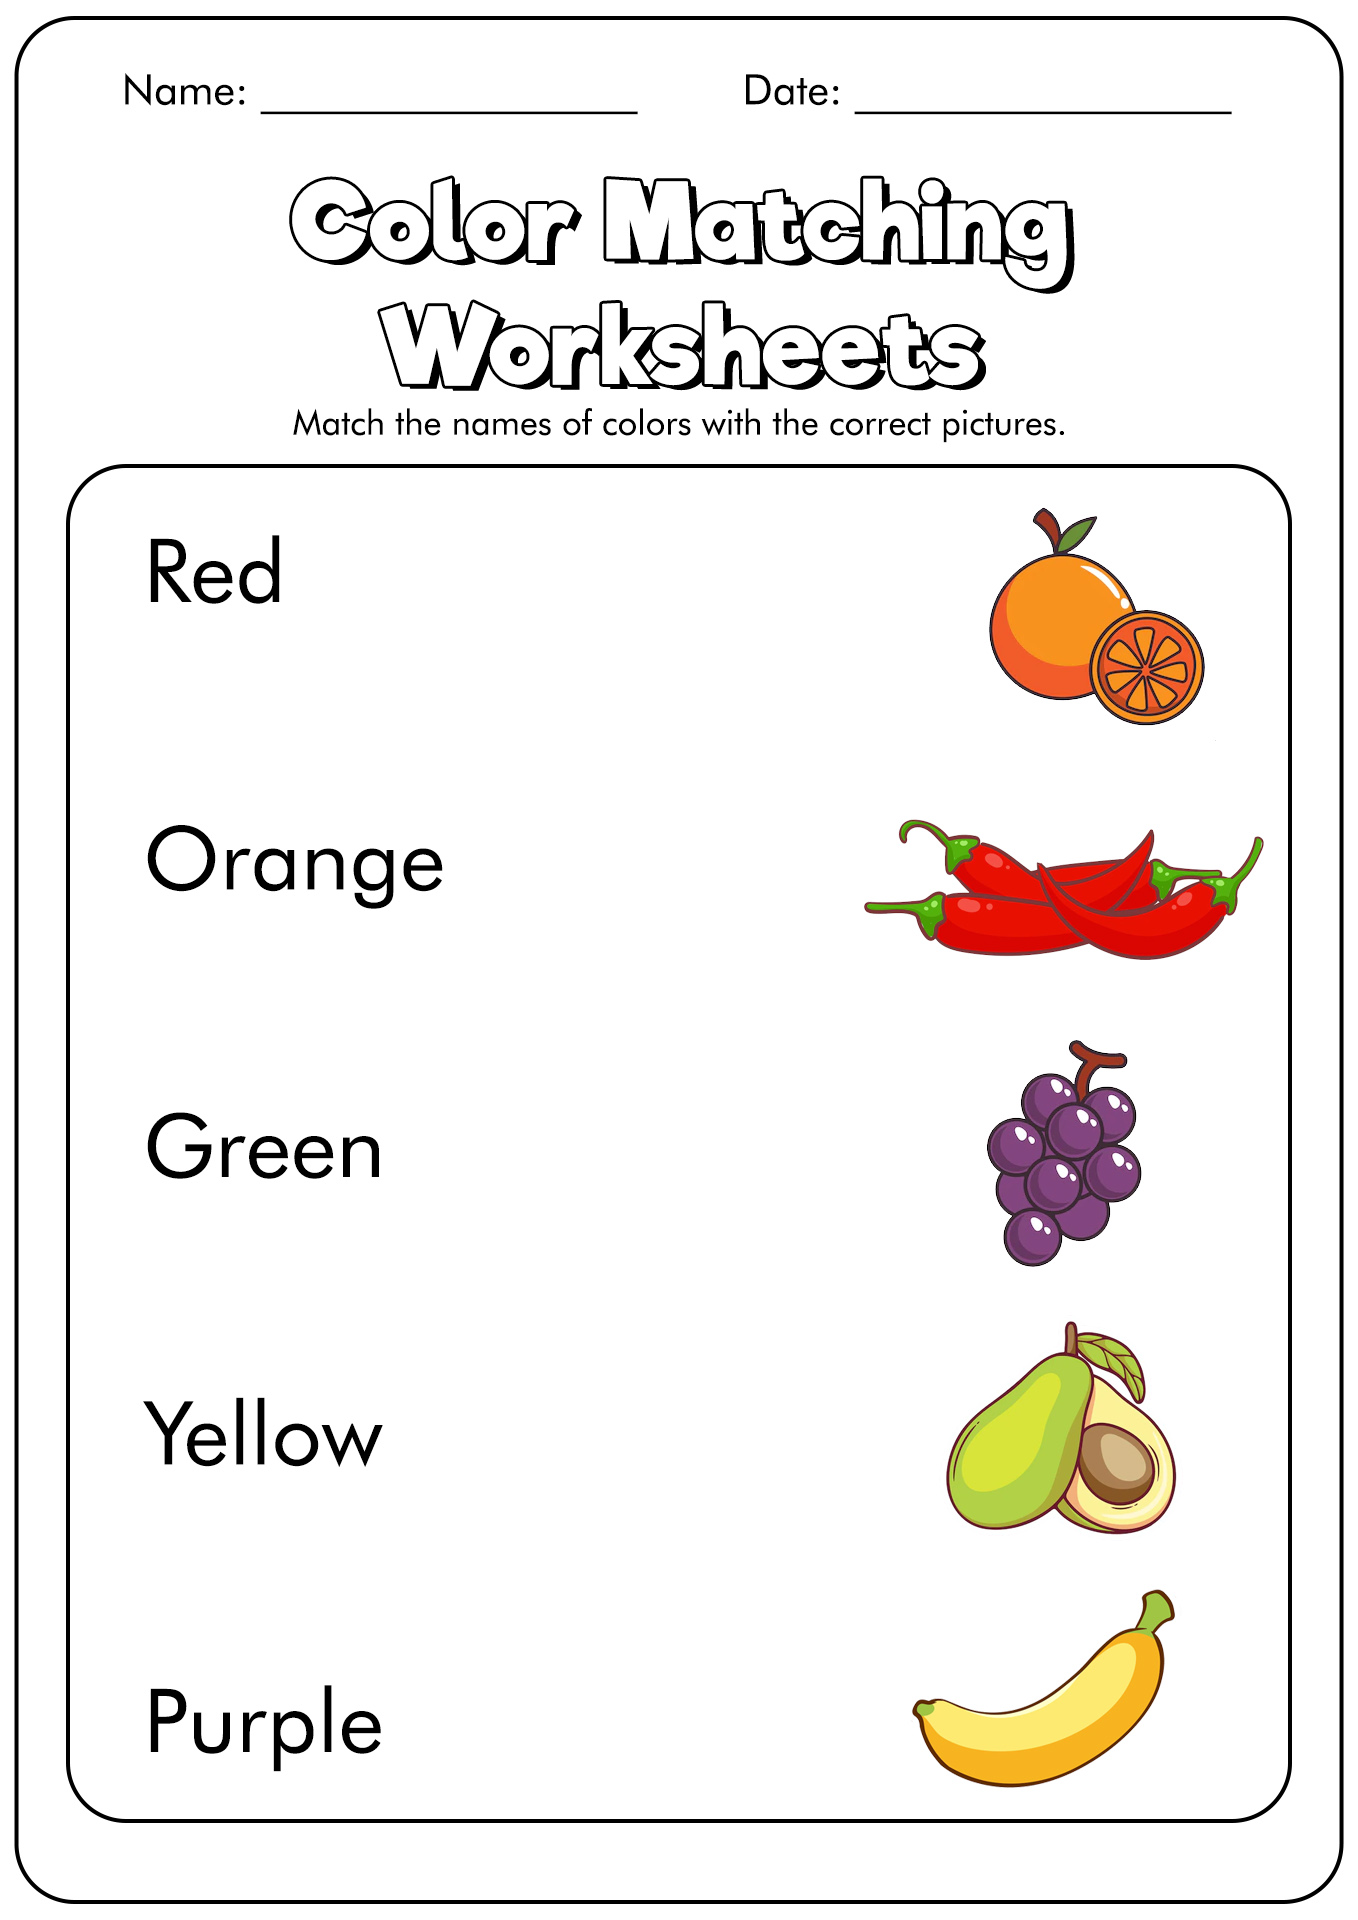 Activity Worksheets for Toddlers Basic Colors Image